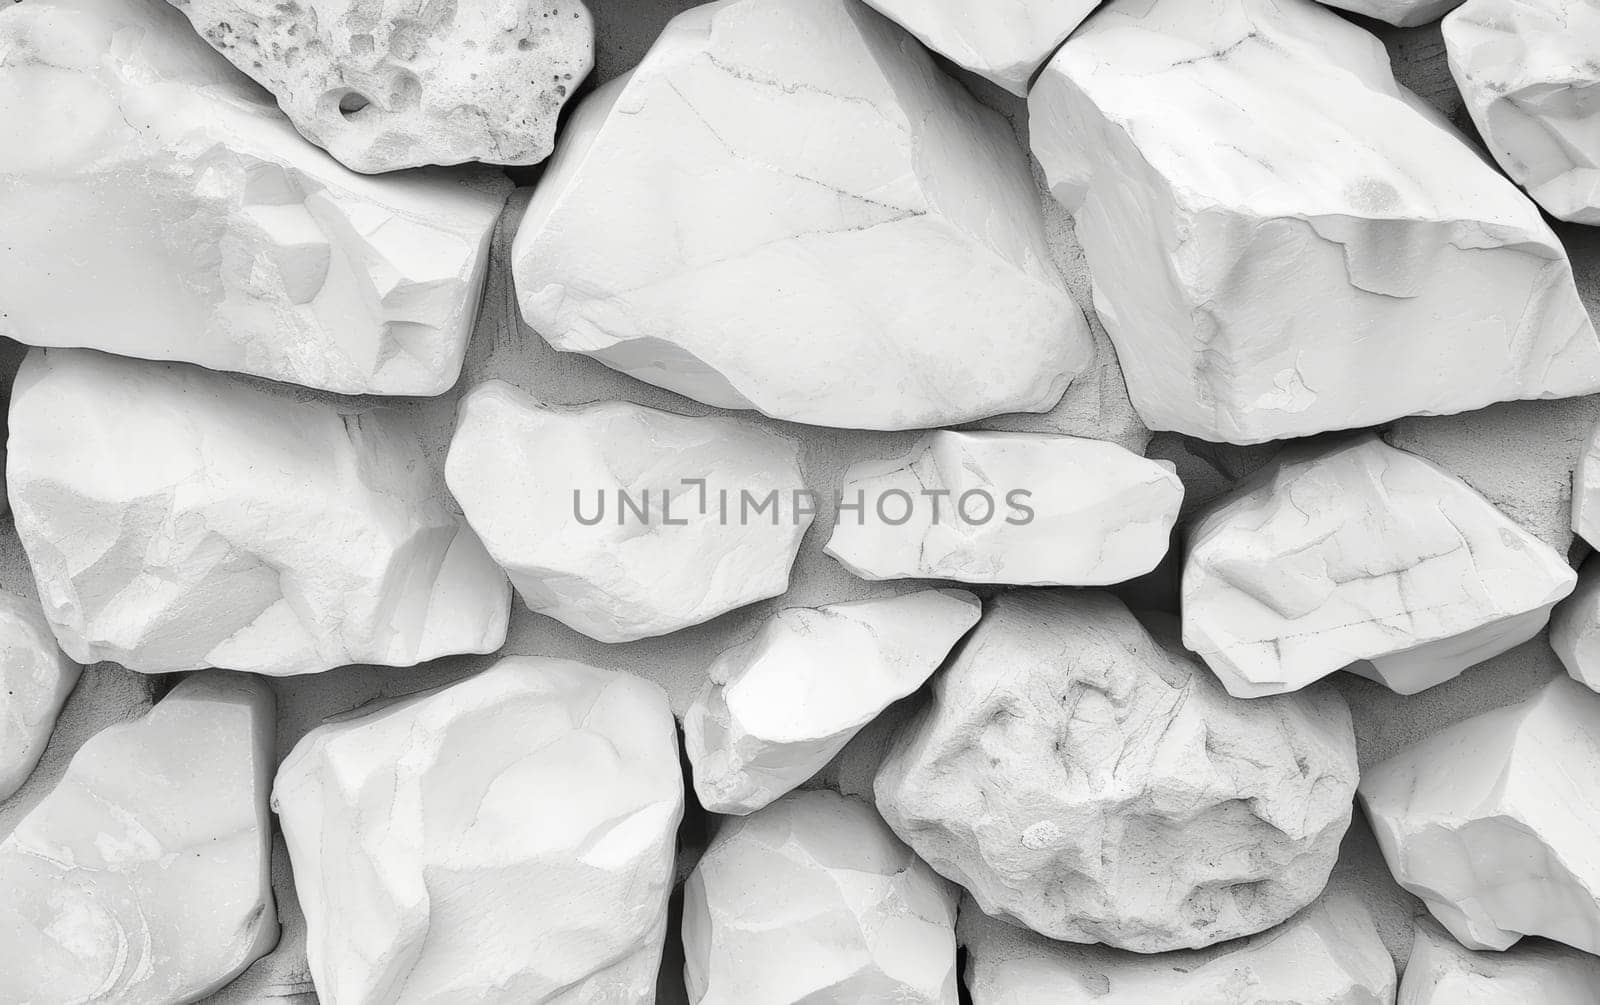 Monochromatic view of a white stone wall with distinct textures and a minimalist aesthetic